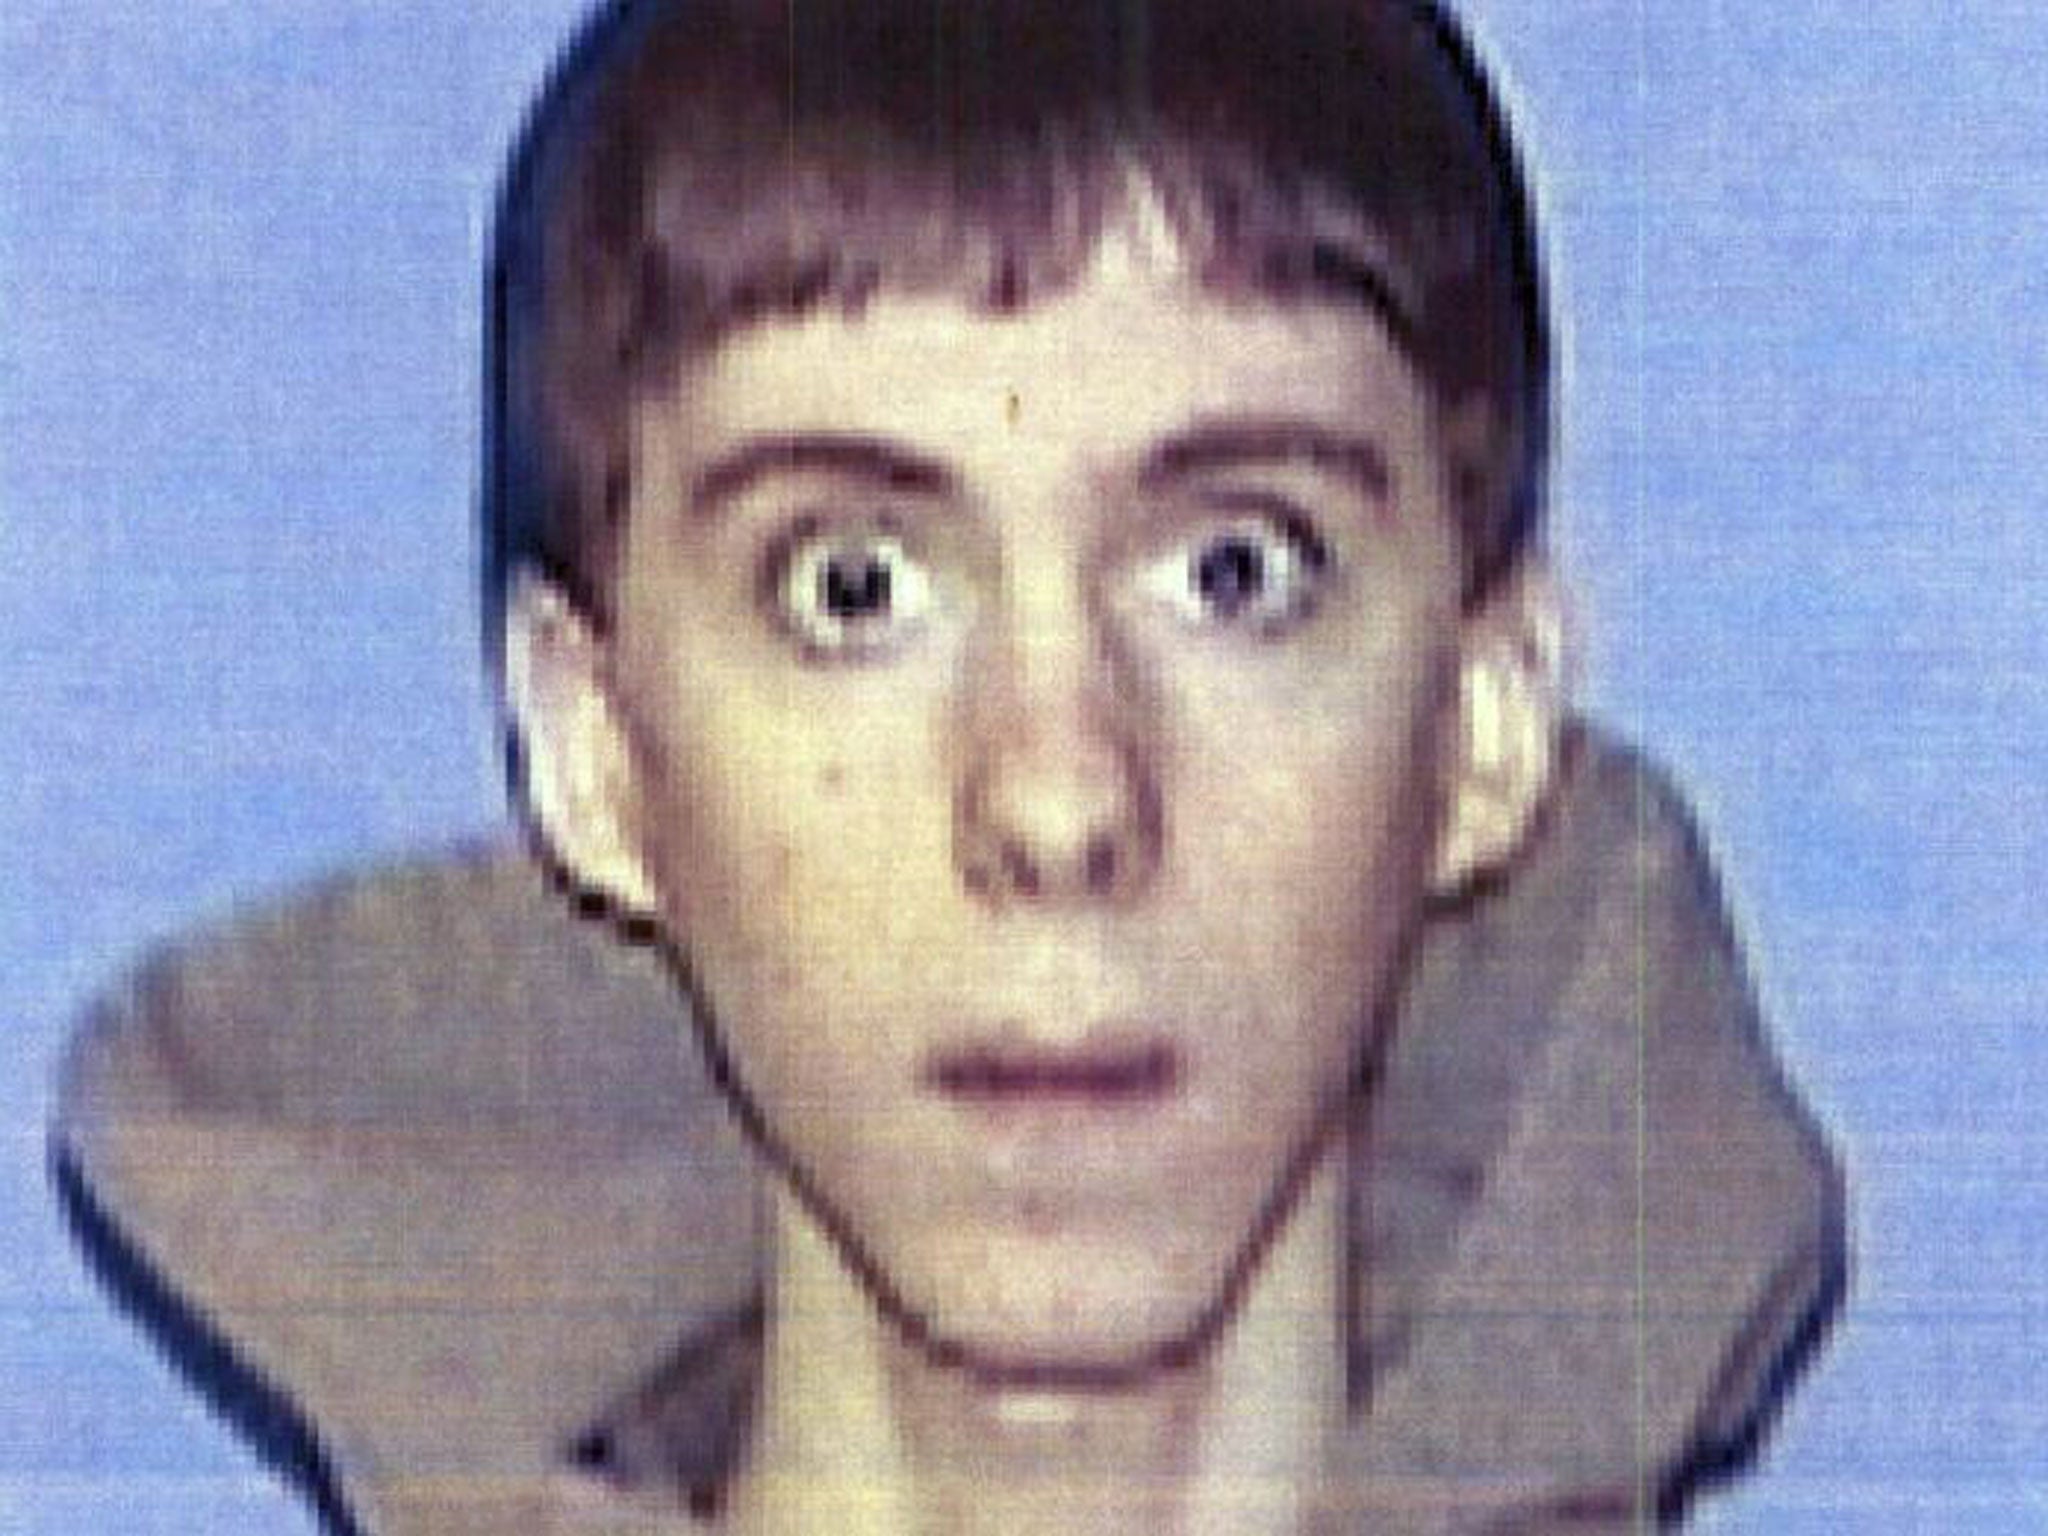 Adam Lanza had developed an interest in mass murders before carrying out the killings